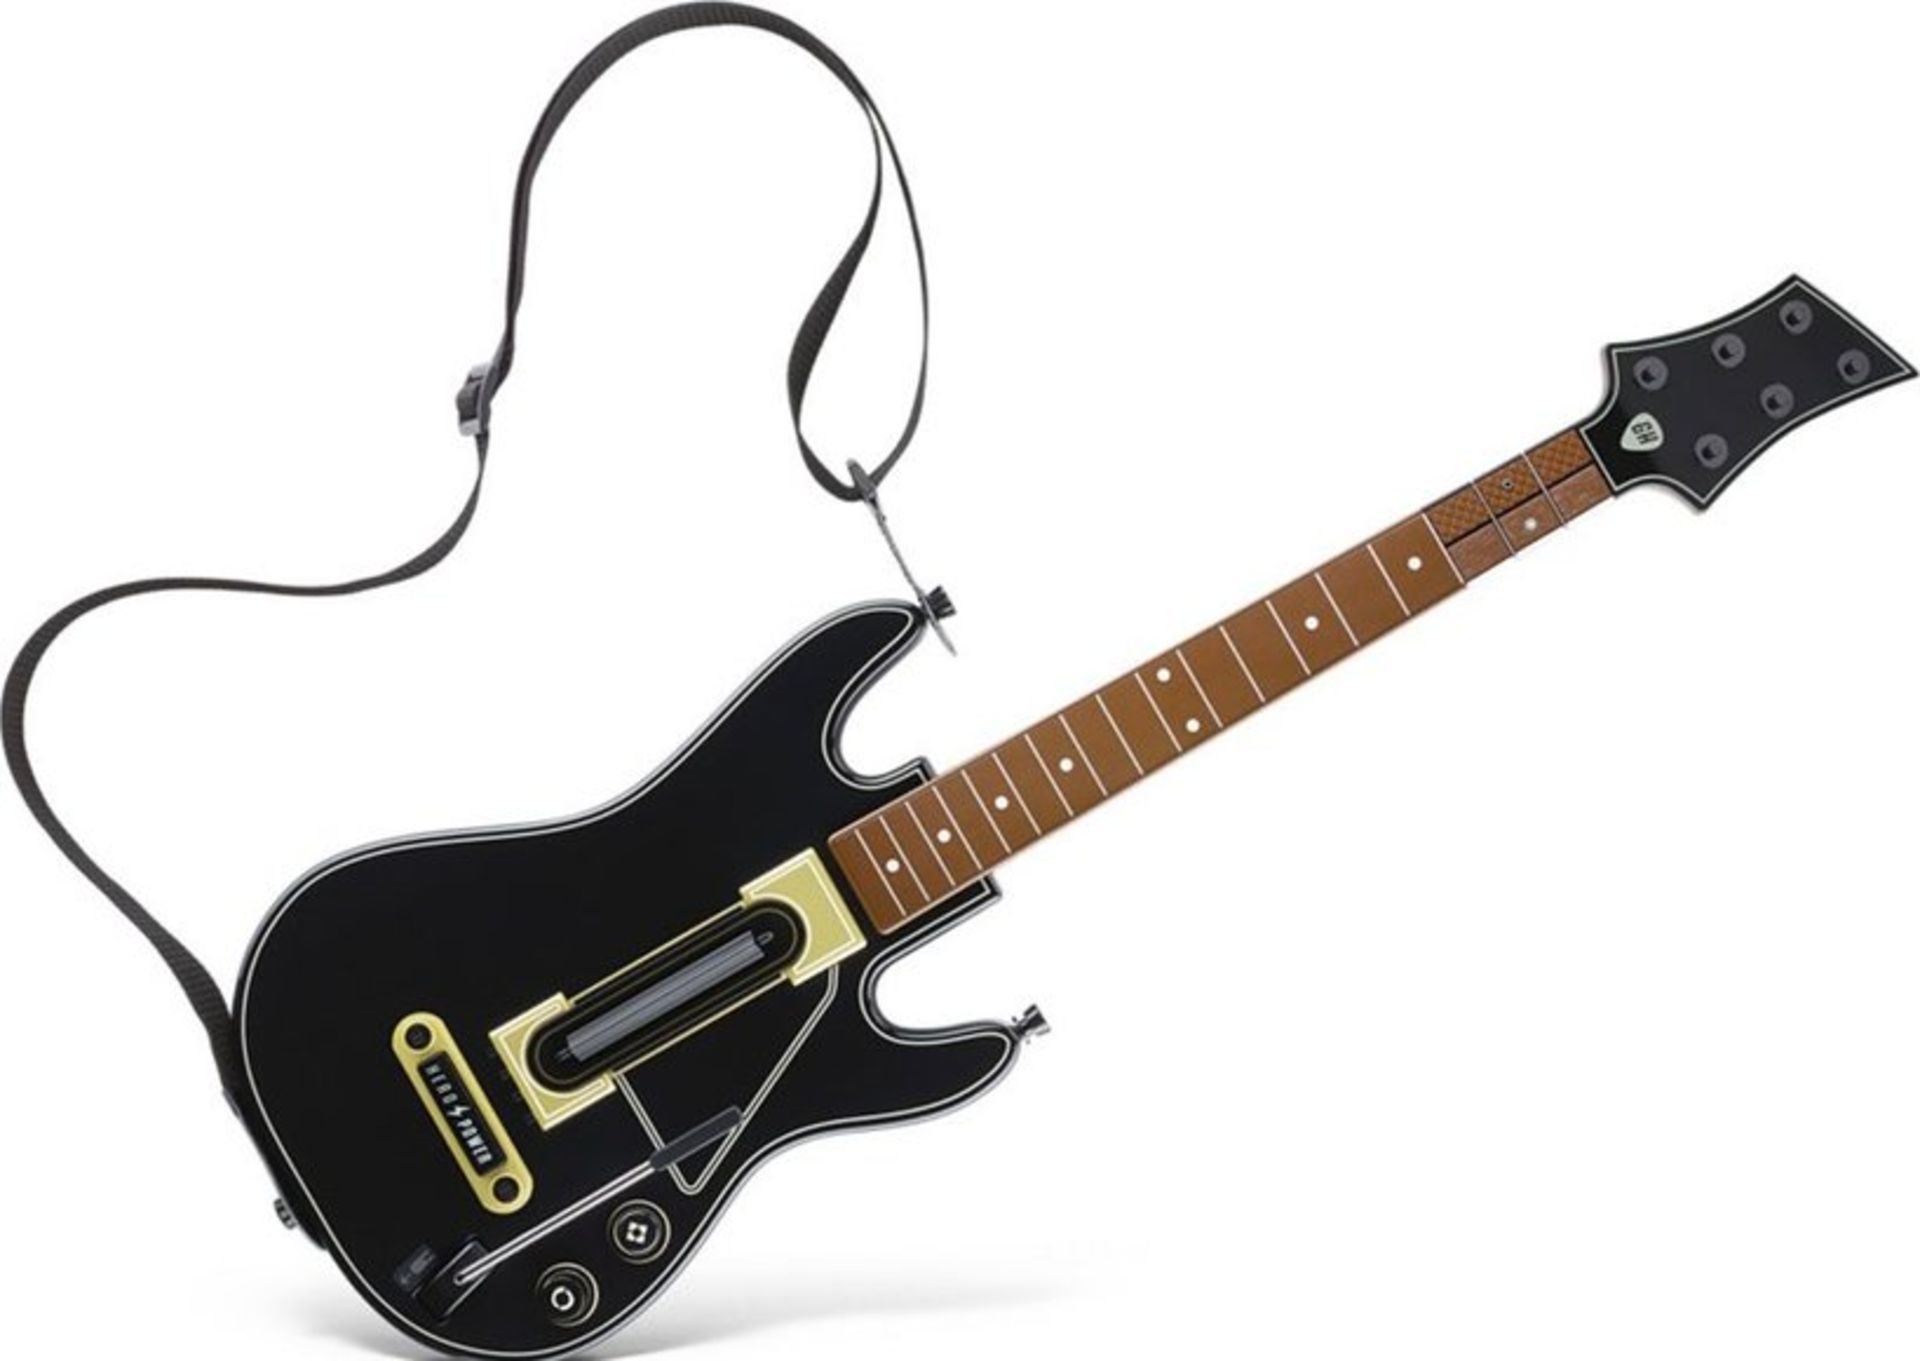 V Brand New Guitar Hero Live For iPhone iPad And iPod Touch Includes Video Game/Guitar Controller/ - Image 4 of 4